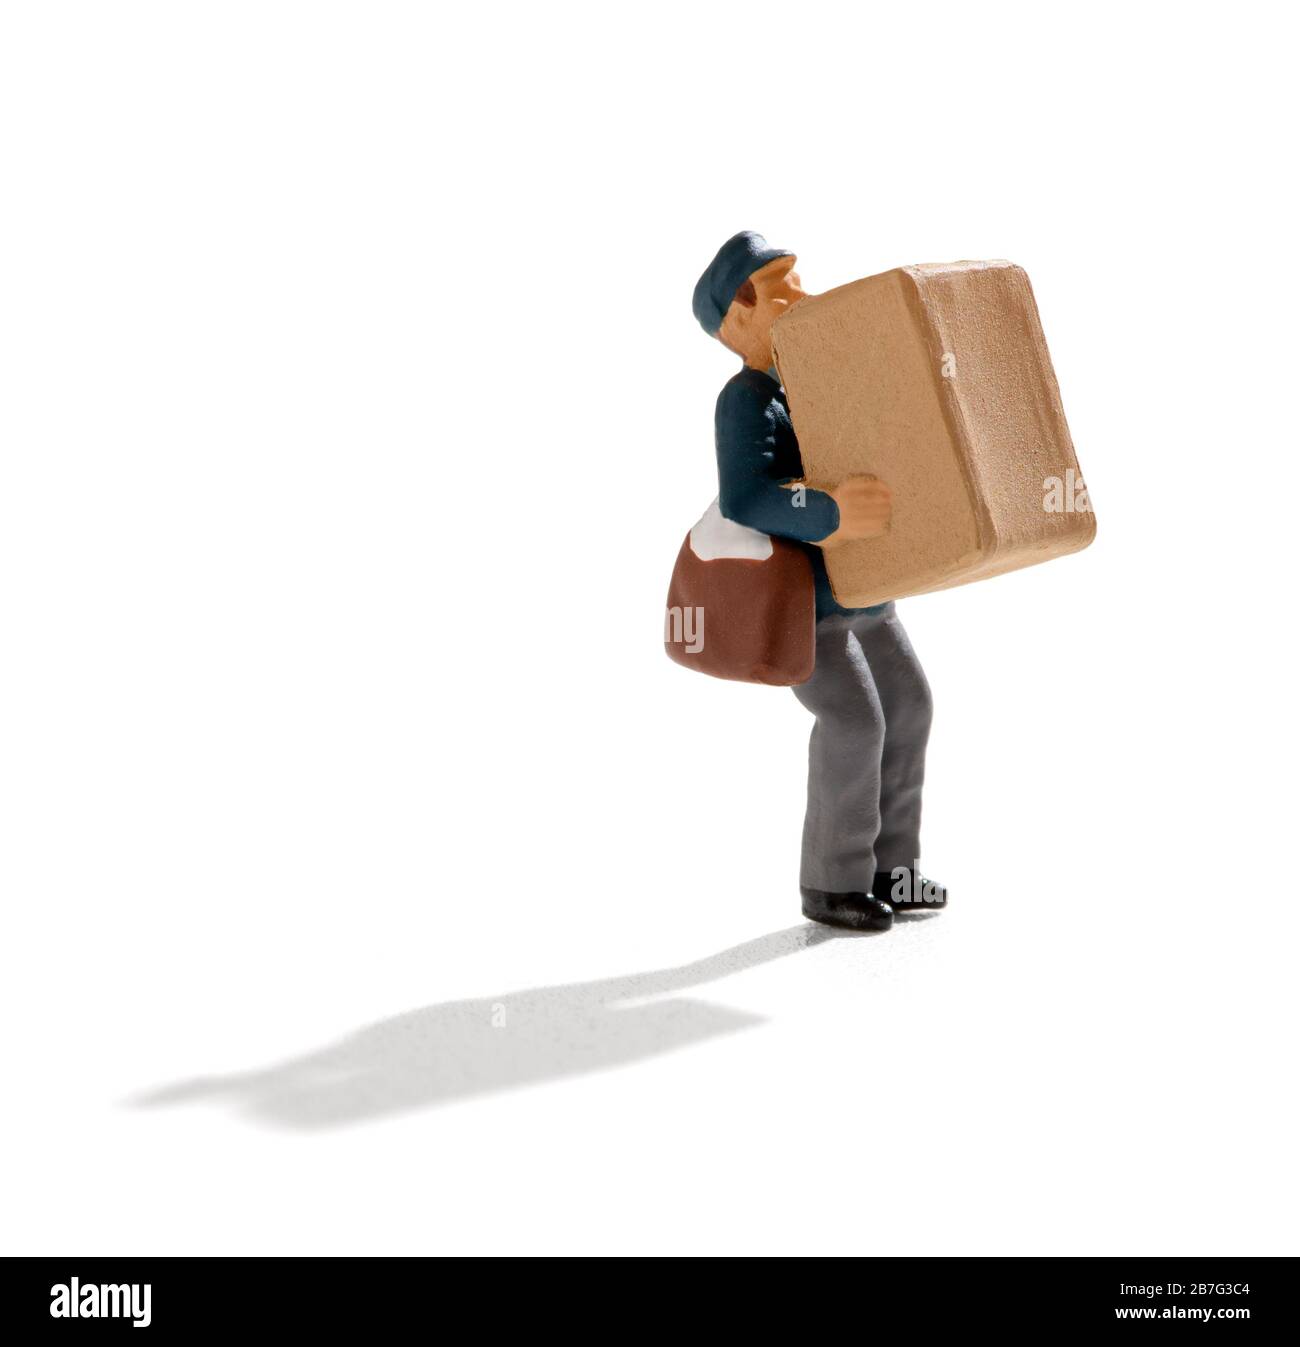 Miniature postman with his satchel of letters over his shoulder carrying a large brown box for delivery over white with shadow Stock Photo